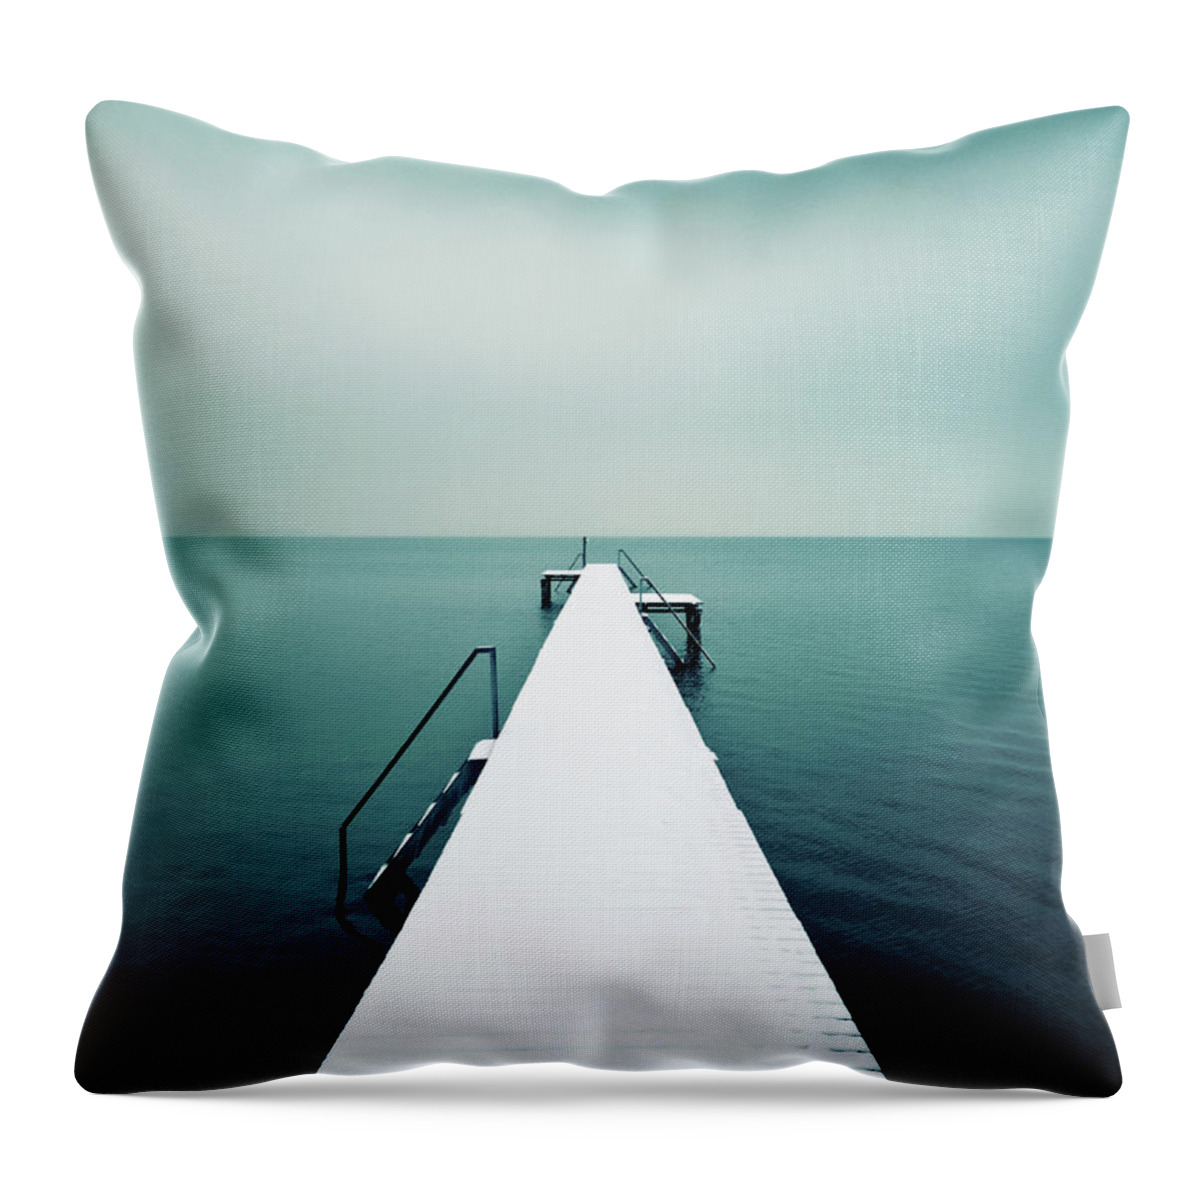 Tranquility Throw Pillow featuring the photograph Snow Covered Jetty by Daitozen